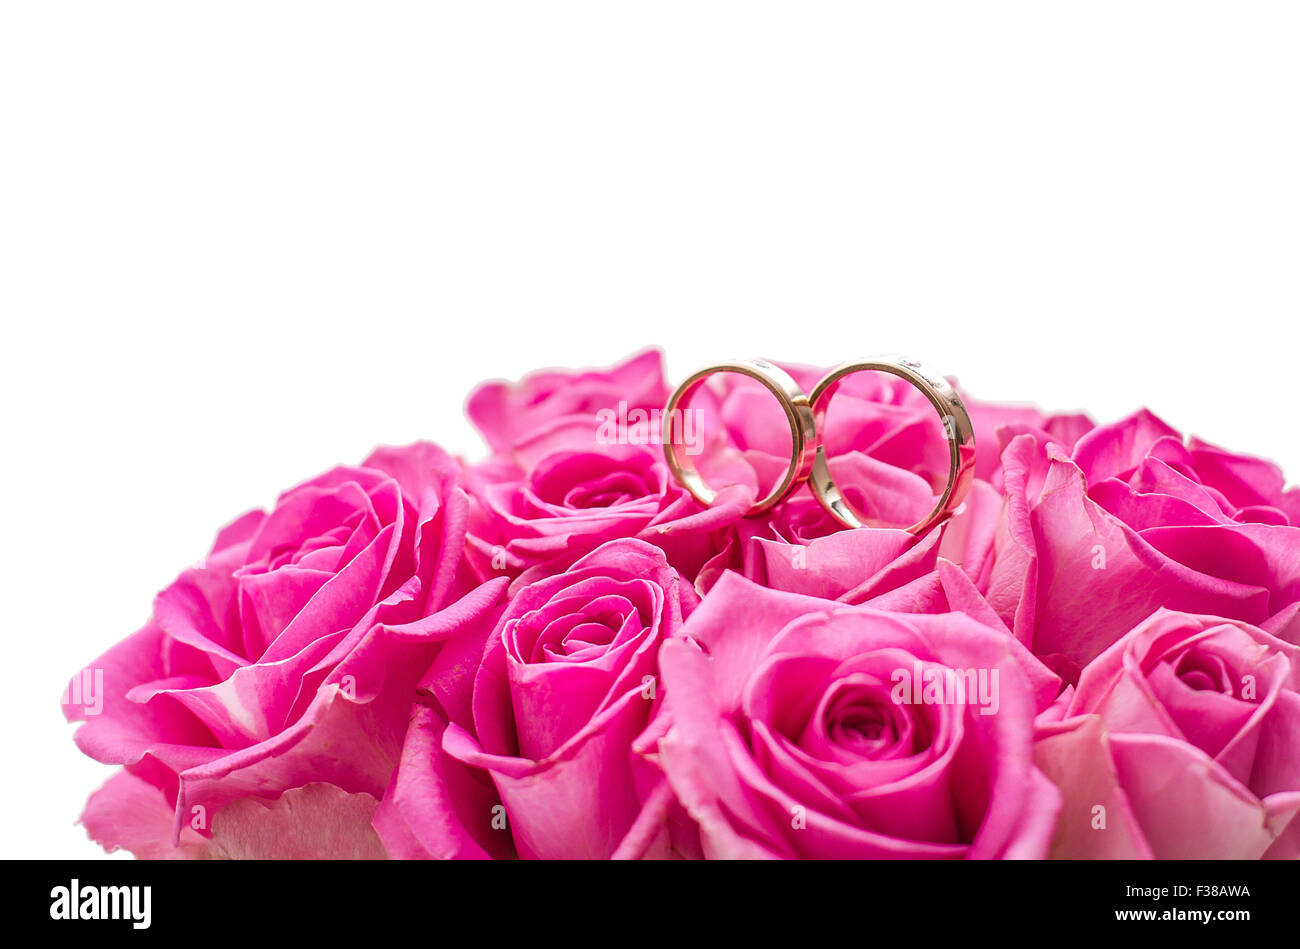 Two wedding rings on rose roses, top isolated Stock Photo